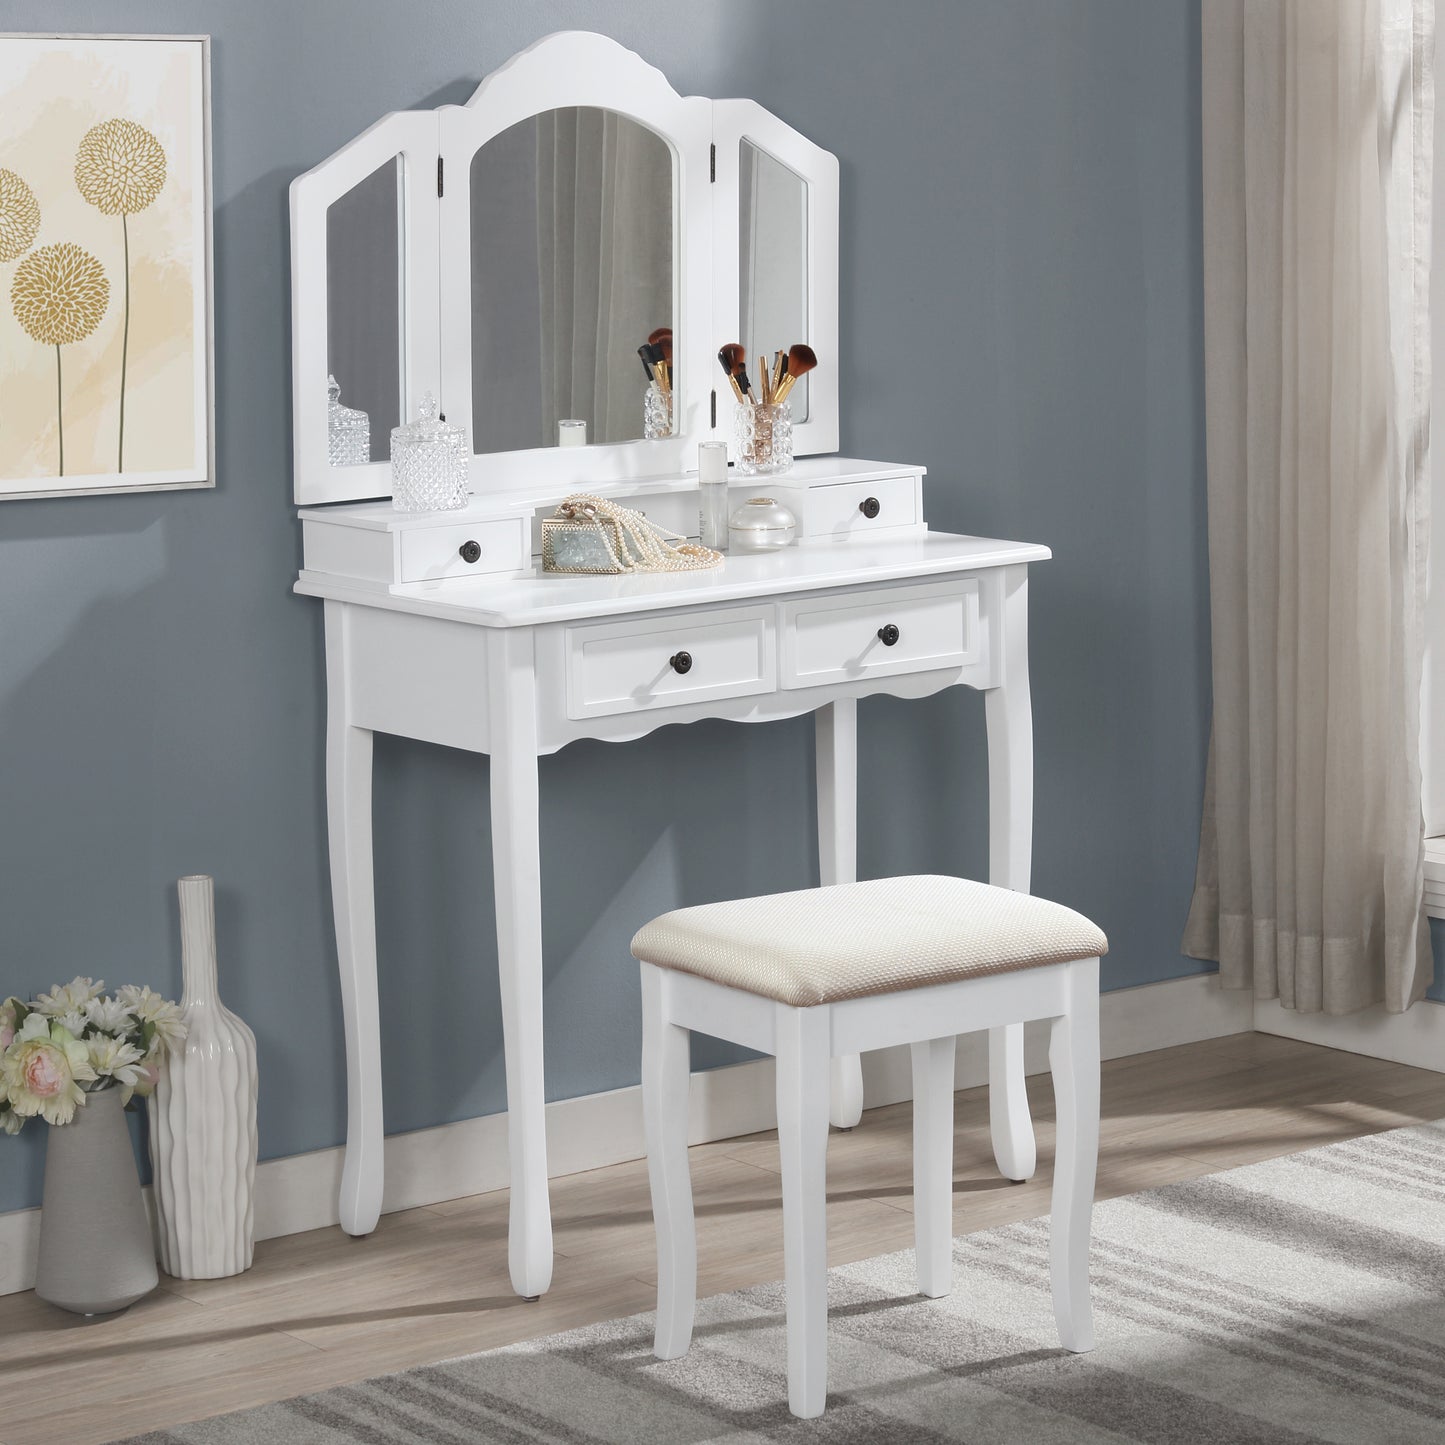 Sanlo White Wooden Vanity, Make Up Table and Stool Set